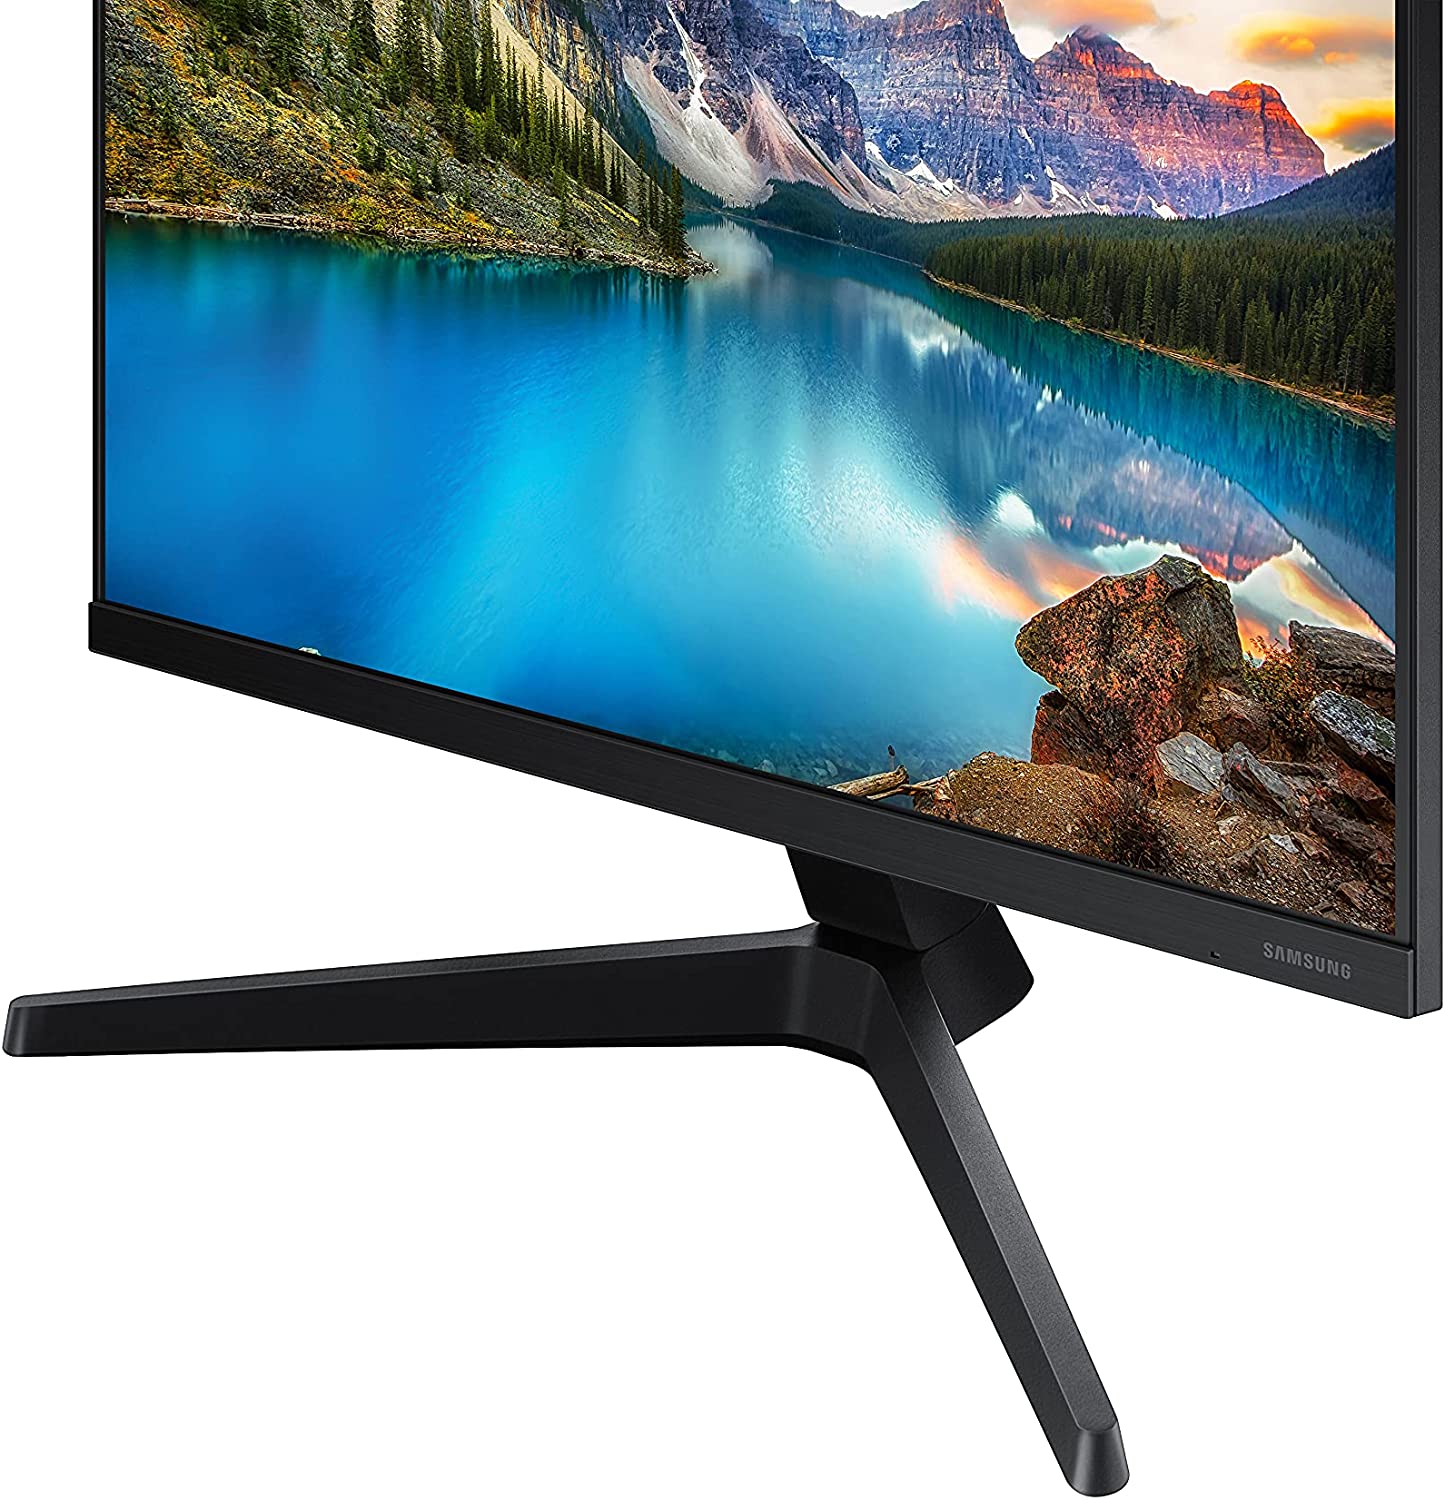 Samsung LF22T374FWNXGO 22" T37F Series 1920 x 1080 60Hz FHD Monitor for Business - Certified Refurbished